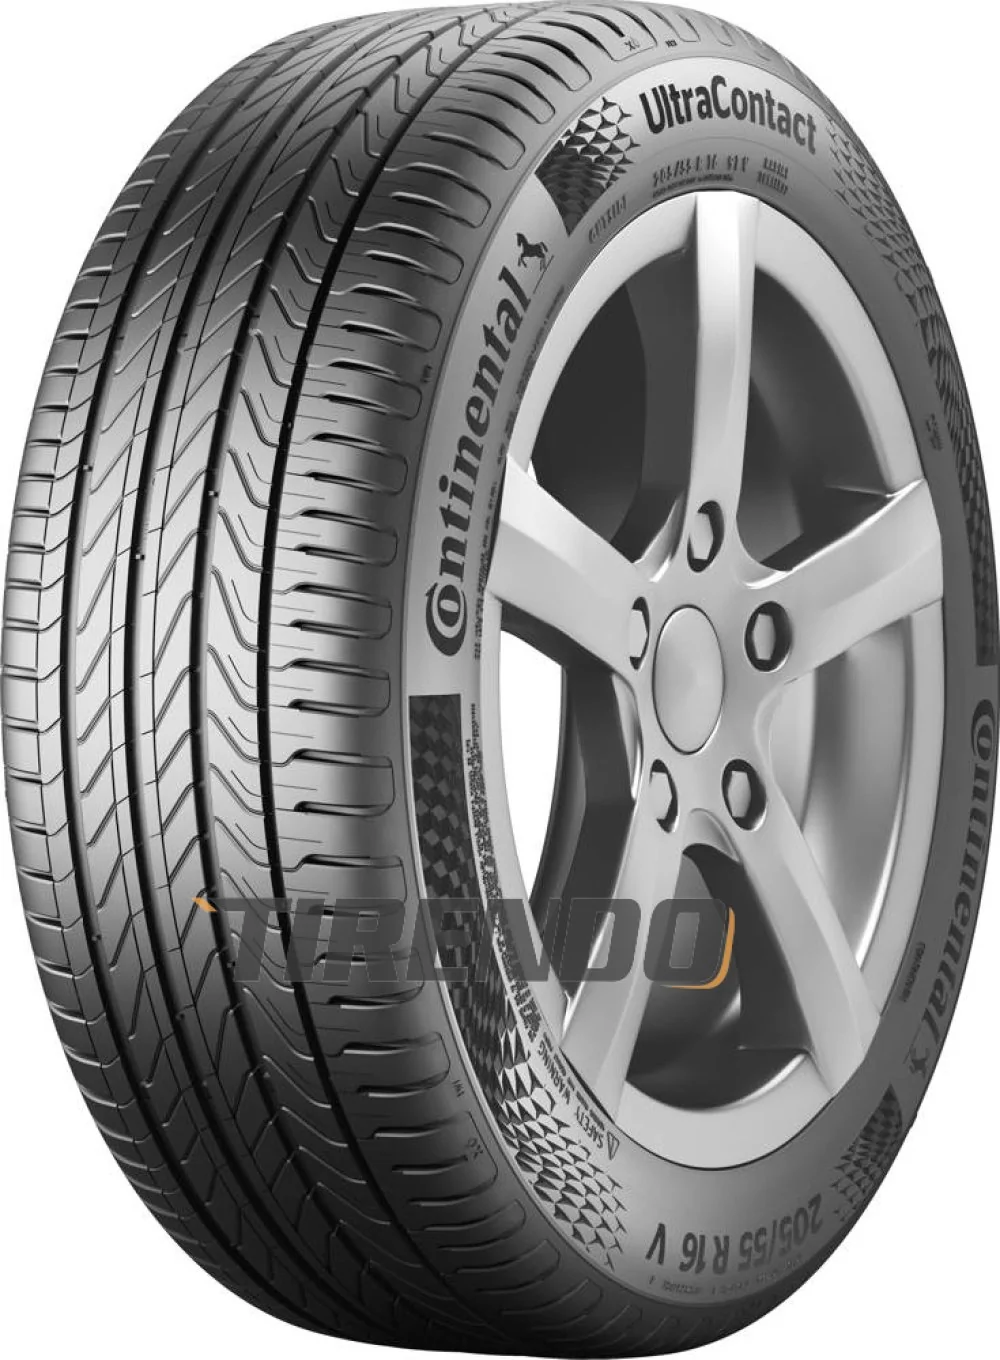 Continental UltraContact 225/65R17 106V